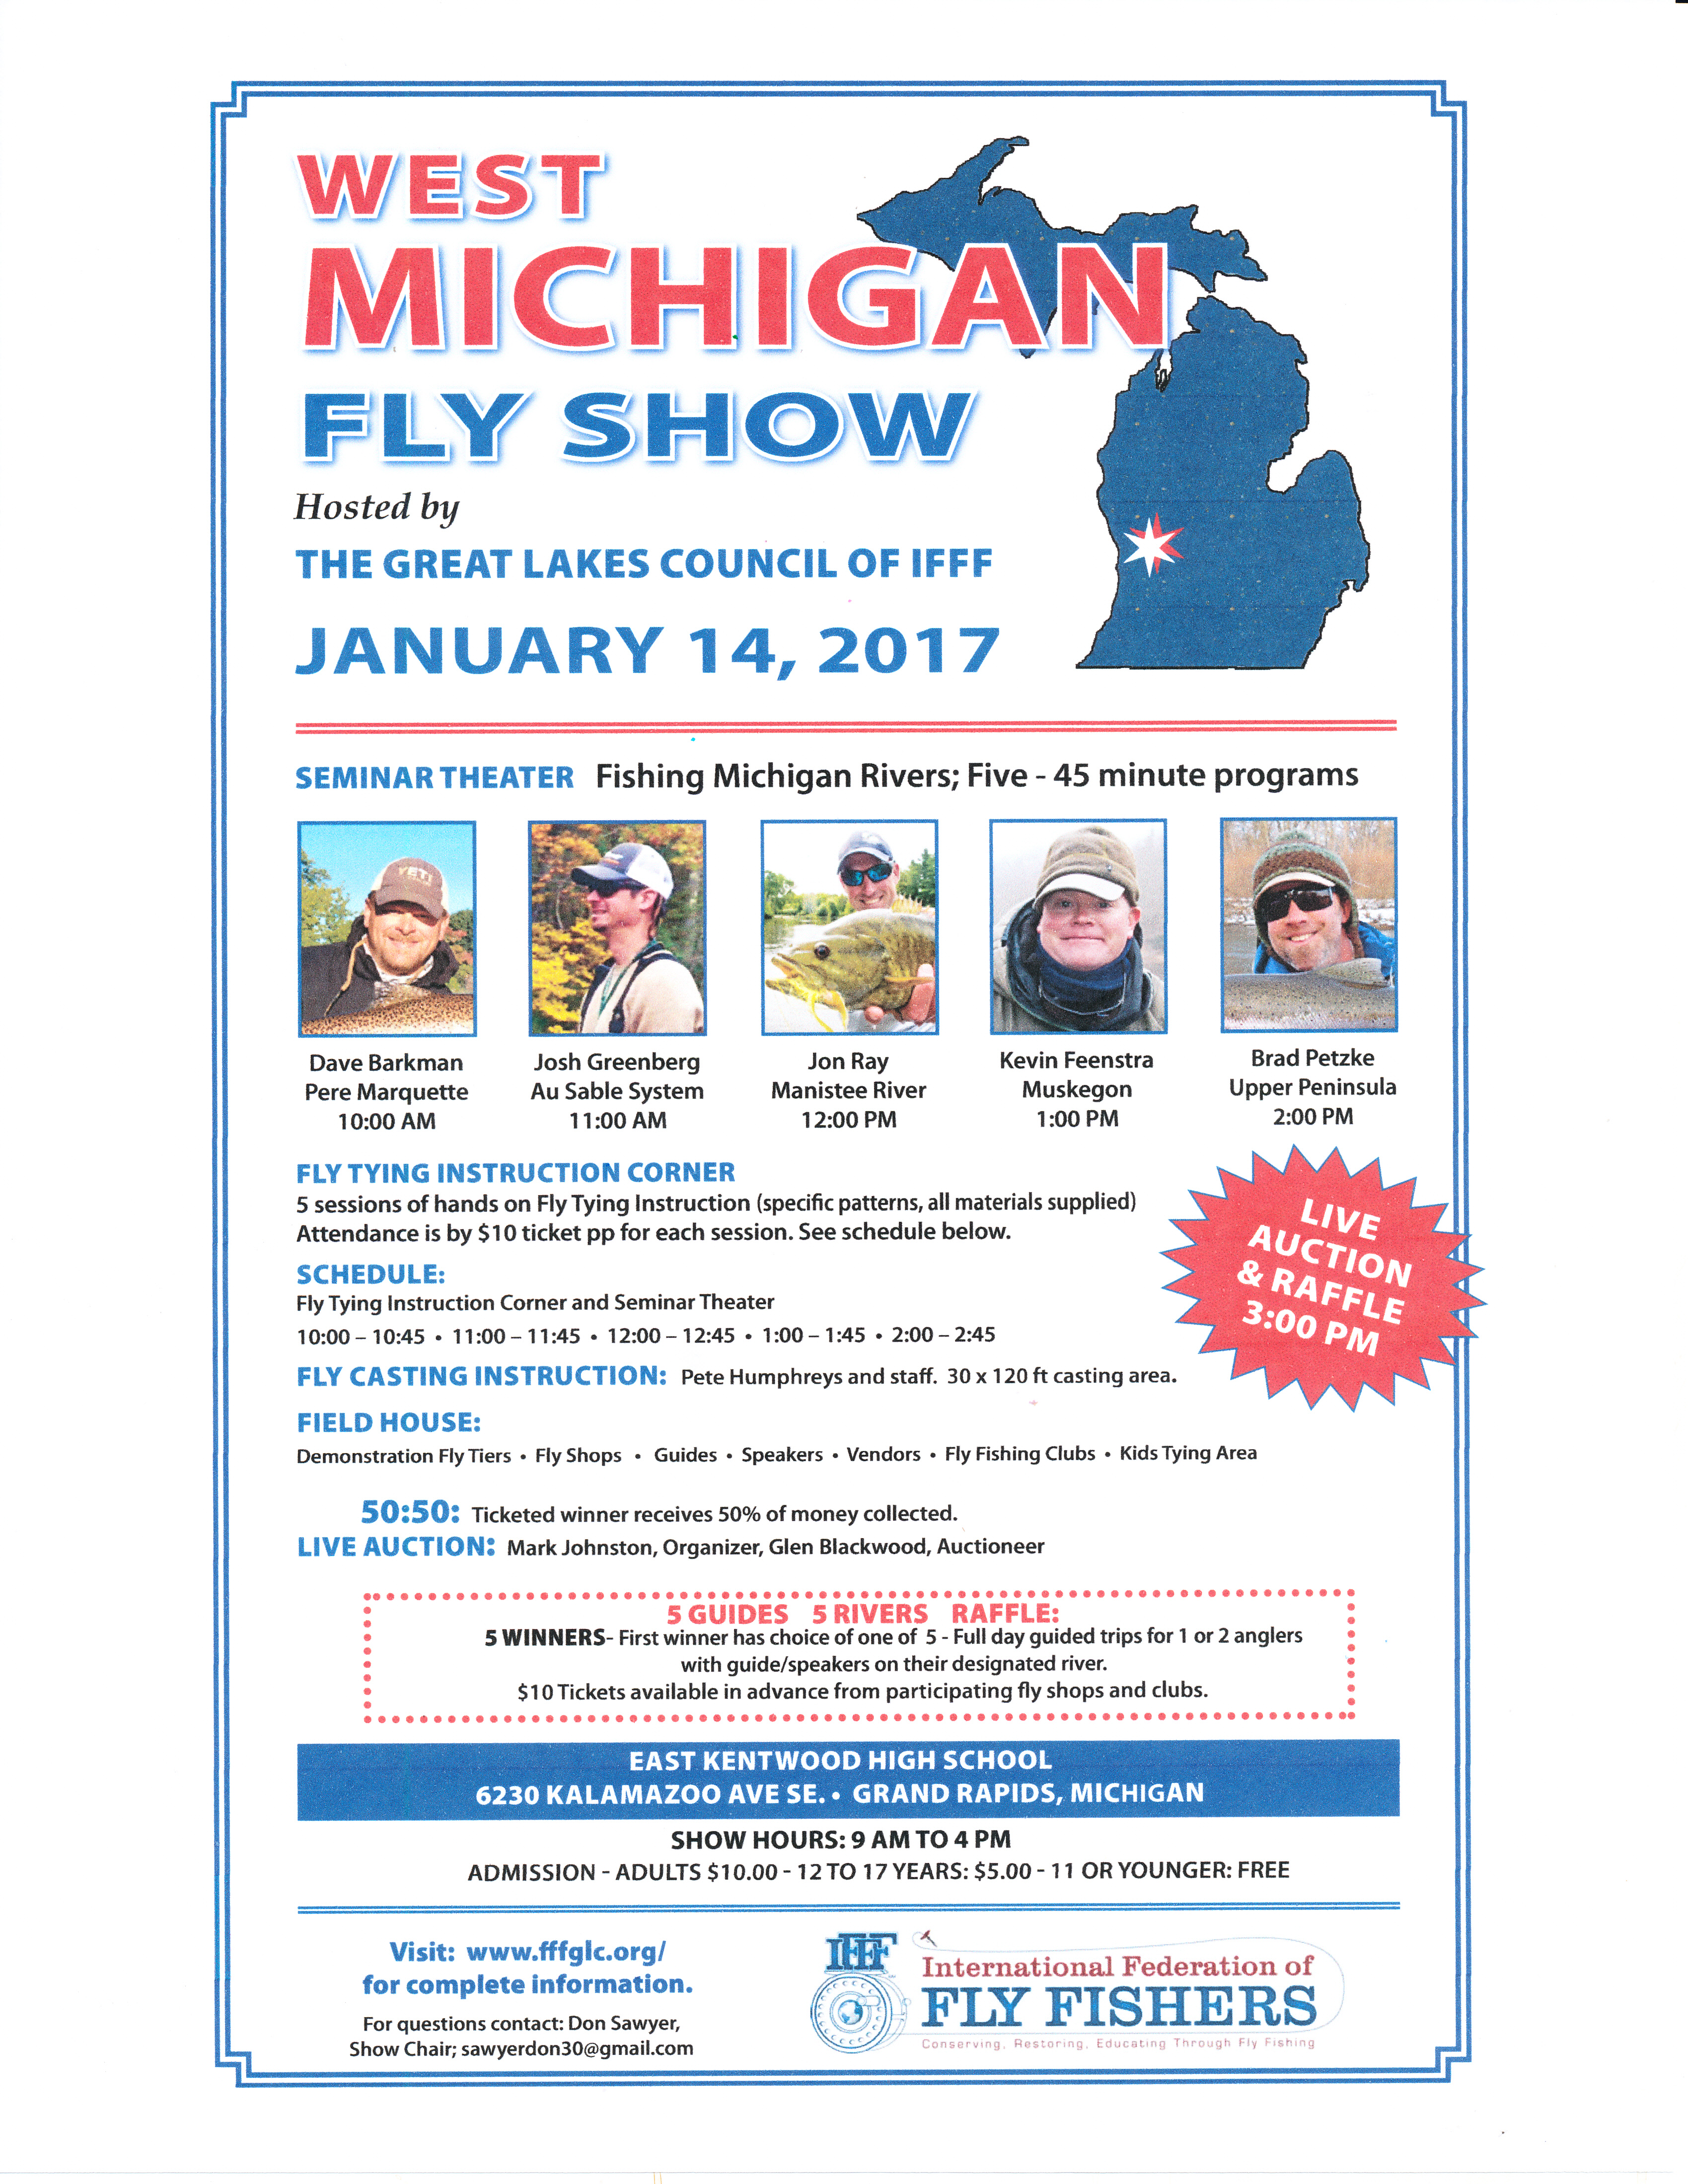 Stop by our booth @ West Michigan Fly Show, Saturday, Jan. 14